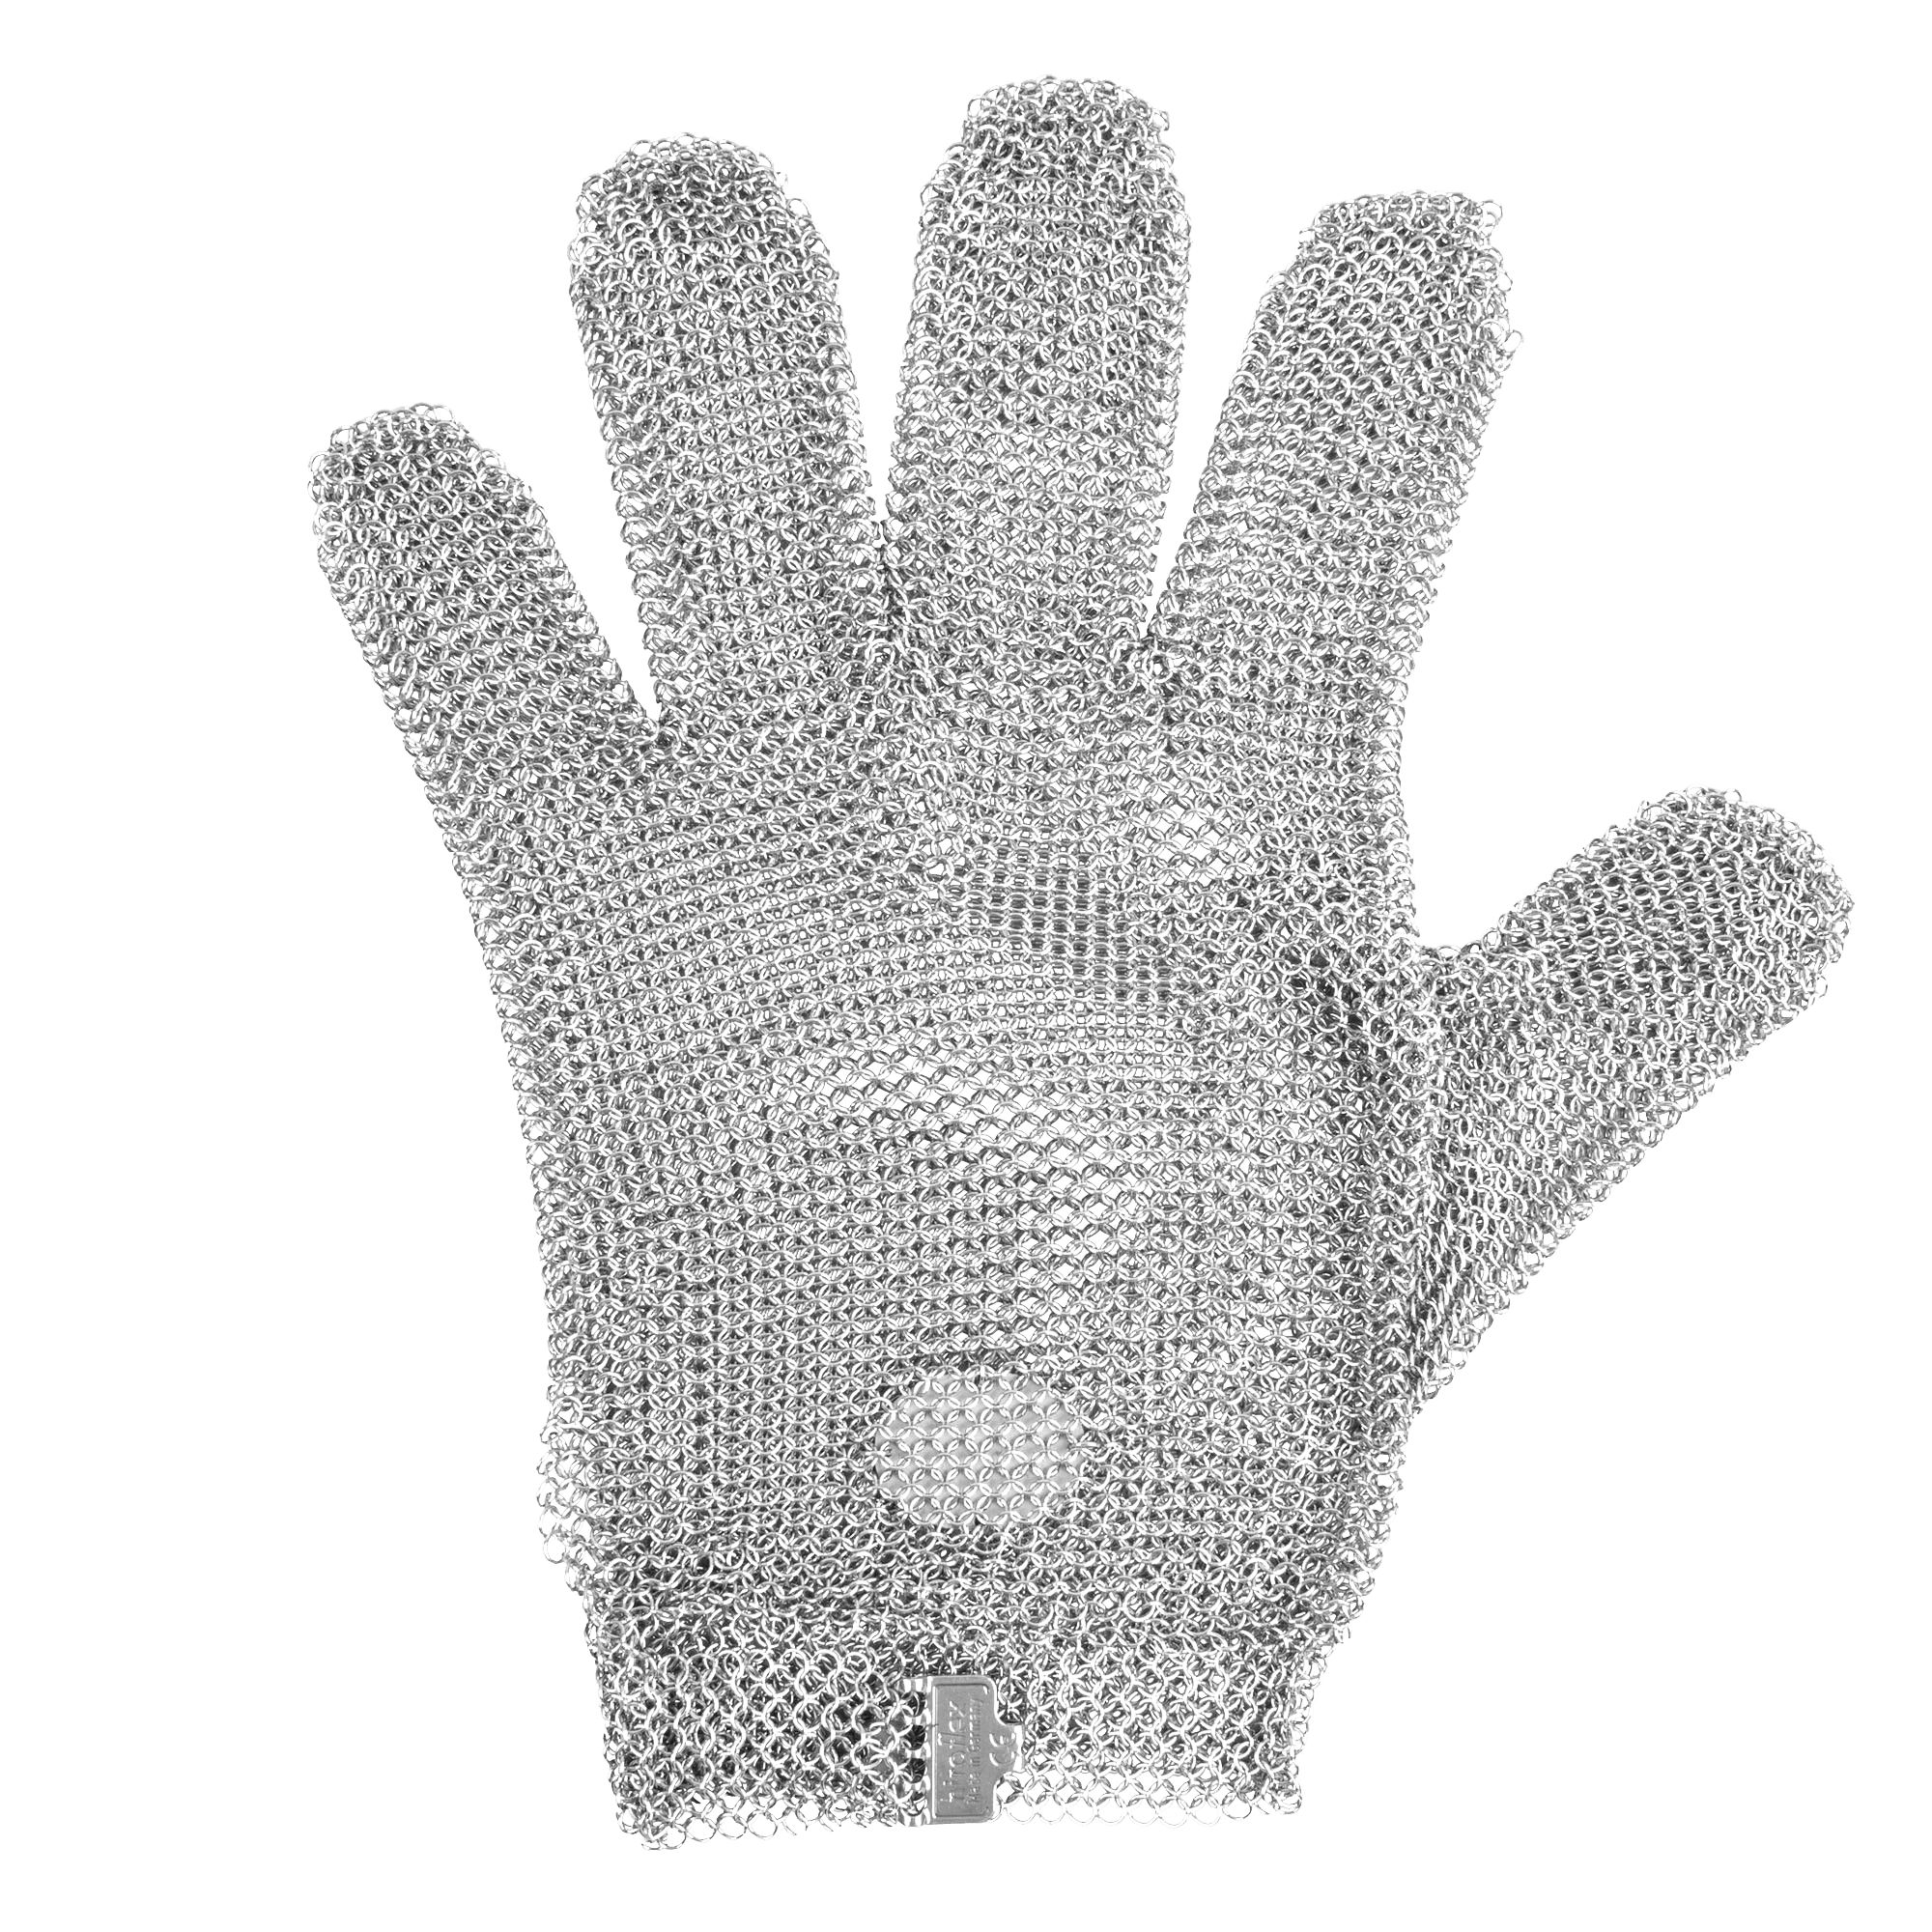 Find Oyster Shucking Gloves Pair The Maryland Store Online Sale Online in  our store you'll love at affordable costs